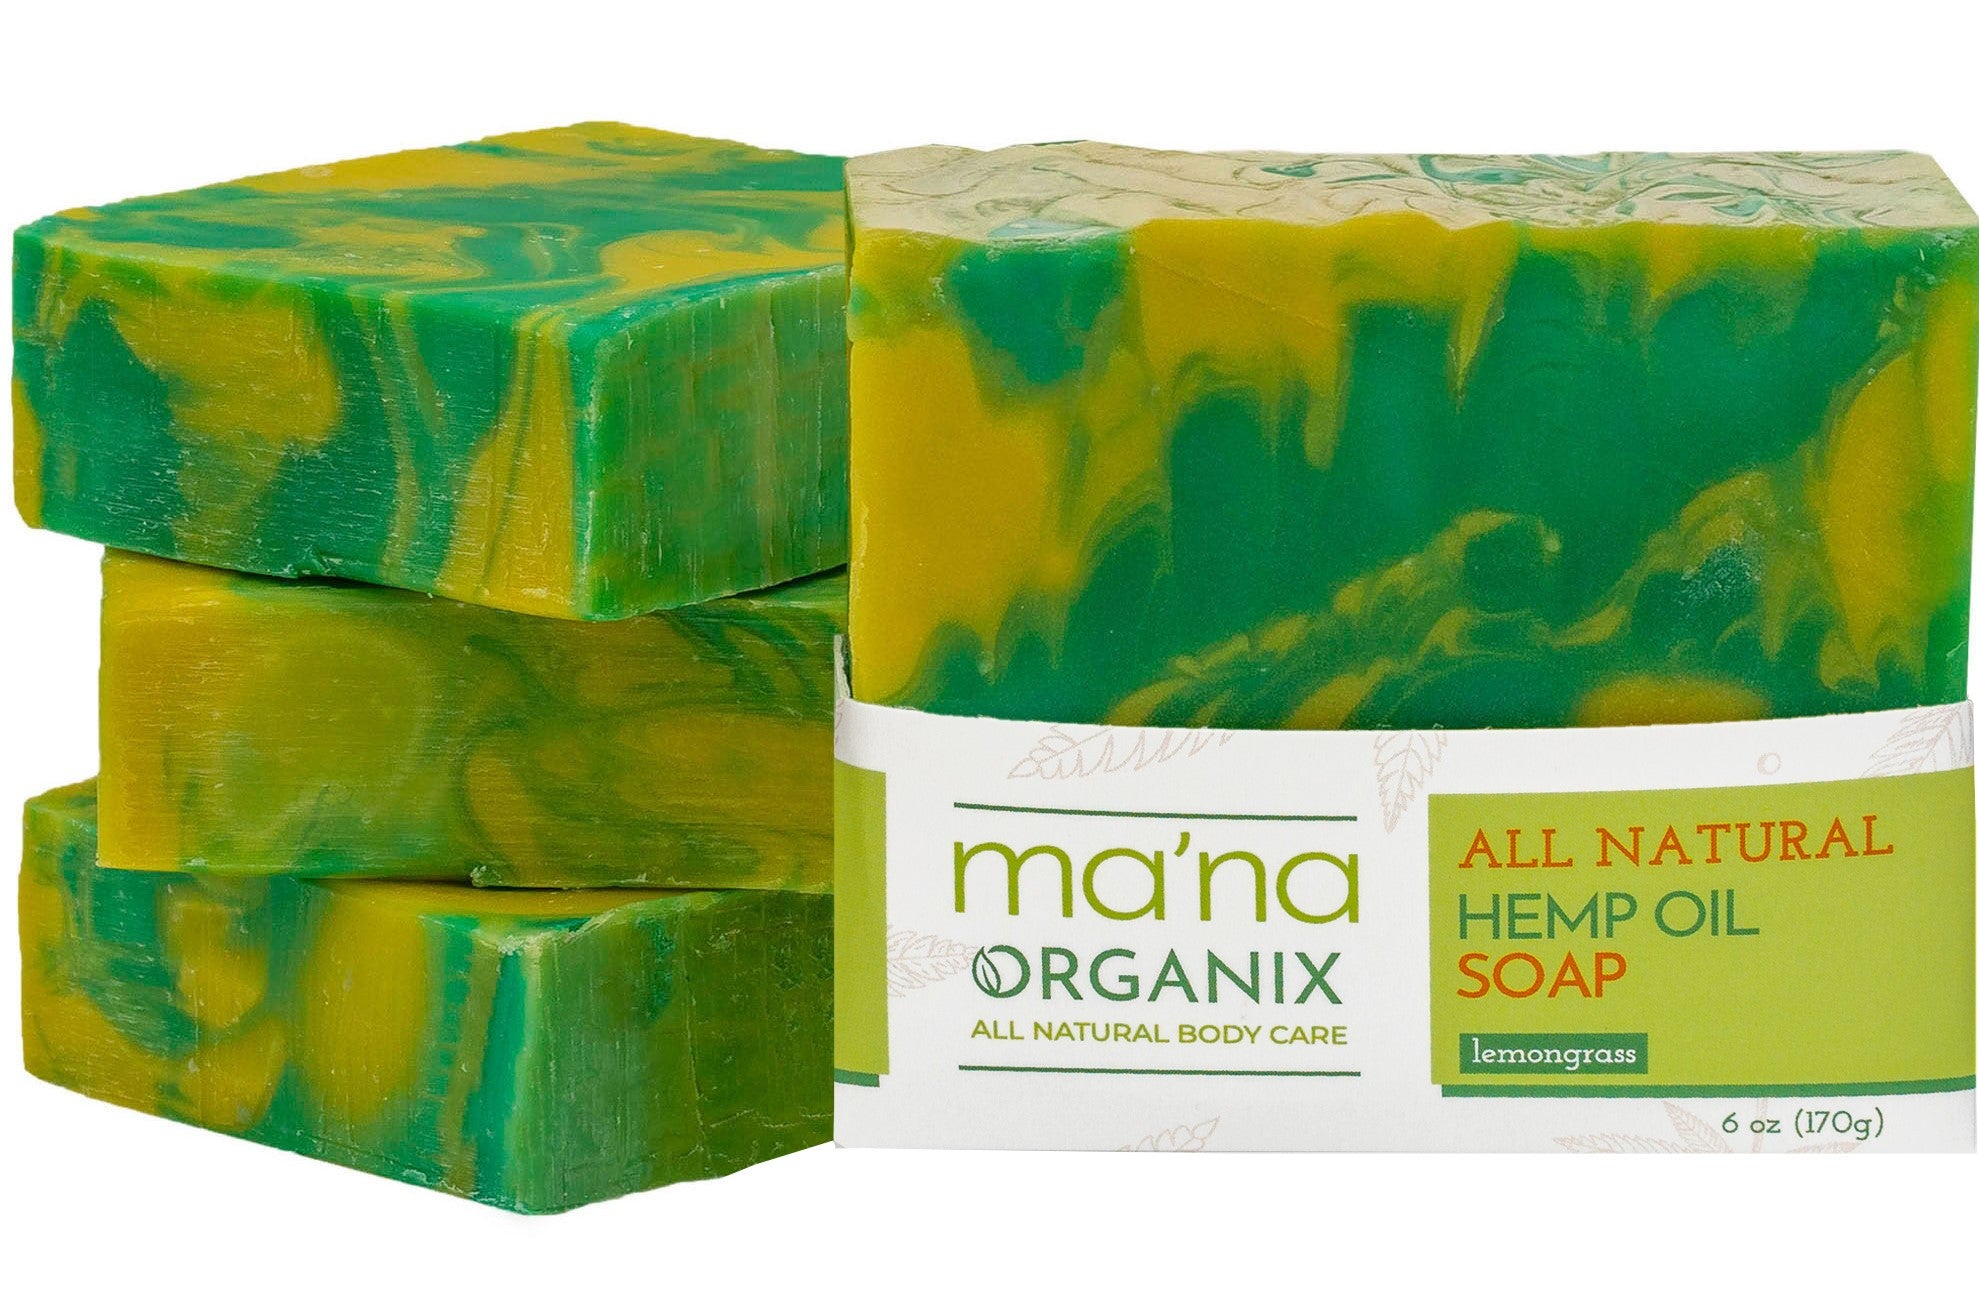 All Natural Hemp Oil & Lemongrass Soap Bar with Ecofriendly and Biodegradable Packaging (6 oz.)